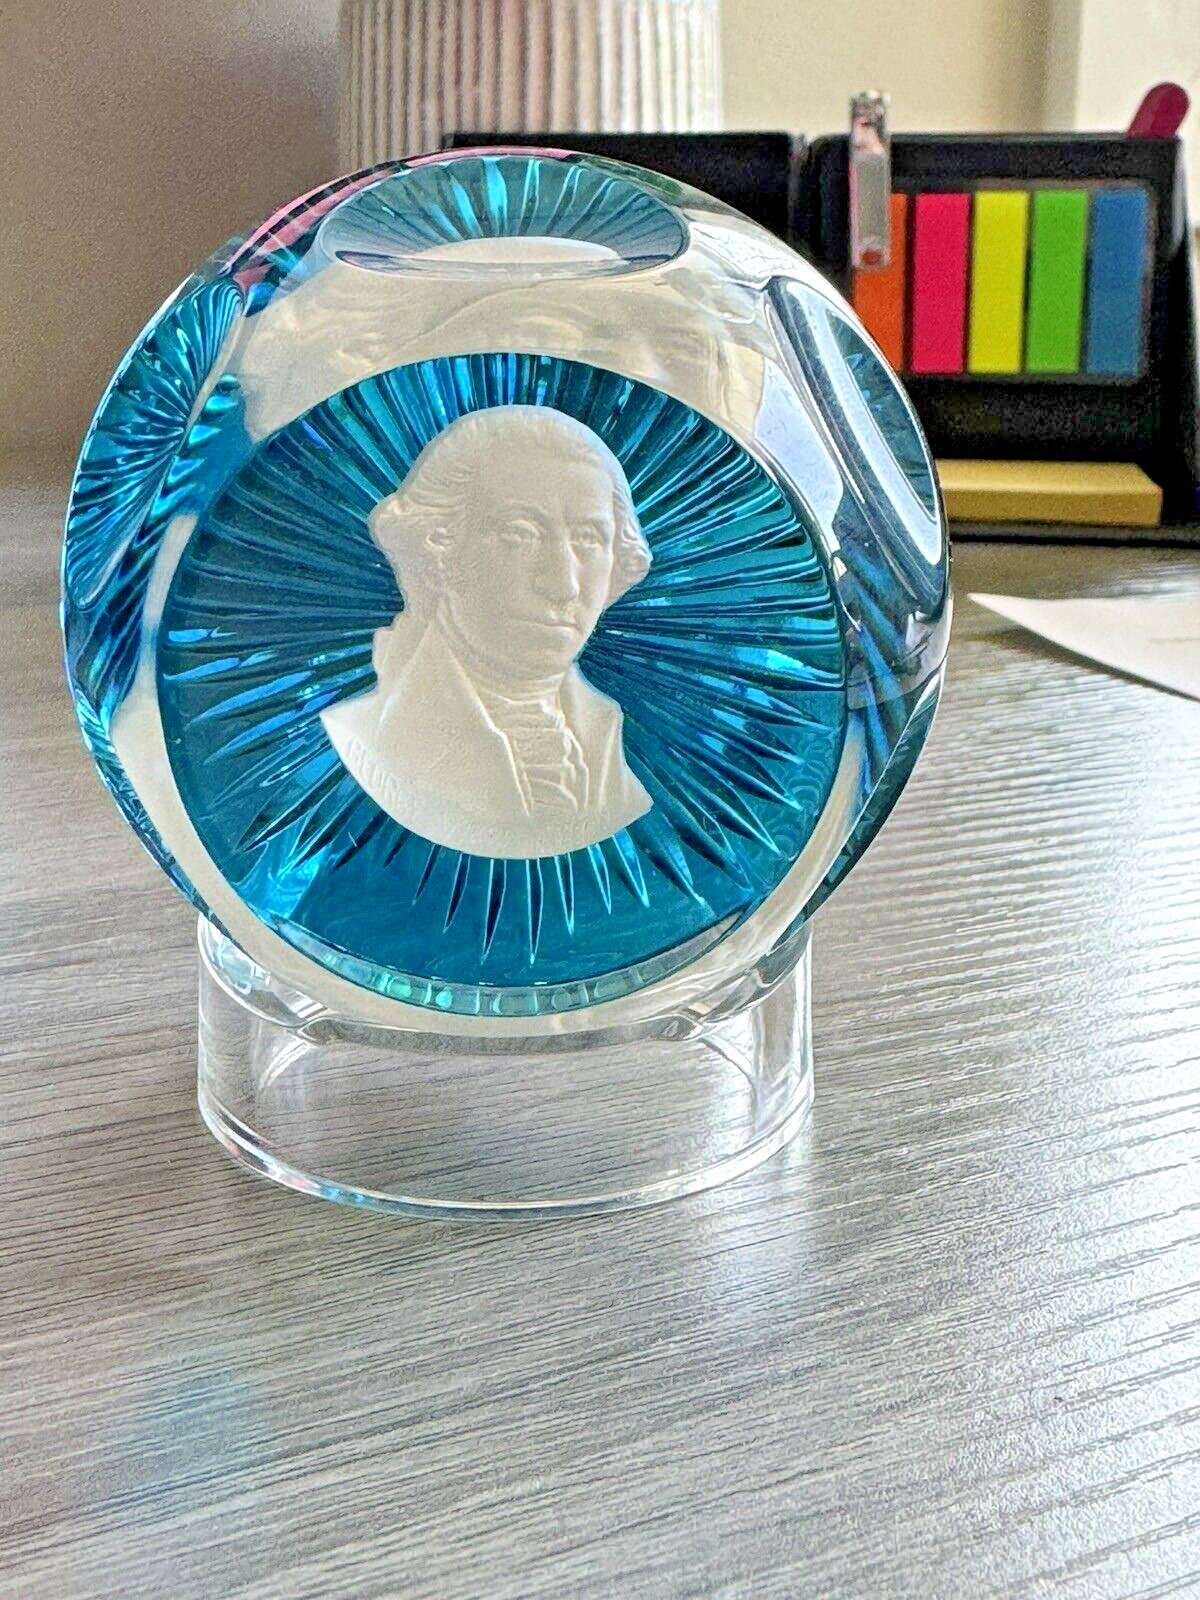 RARE George Washington 1977 Baccarat Franklin Mint Crystal Paper Weight